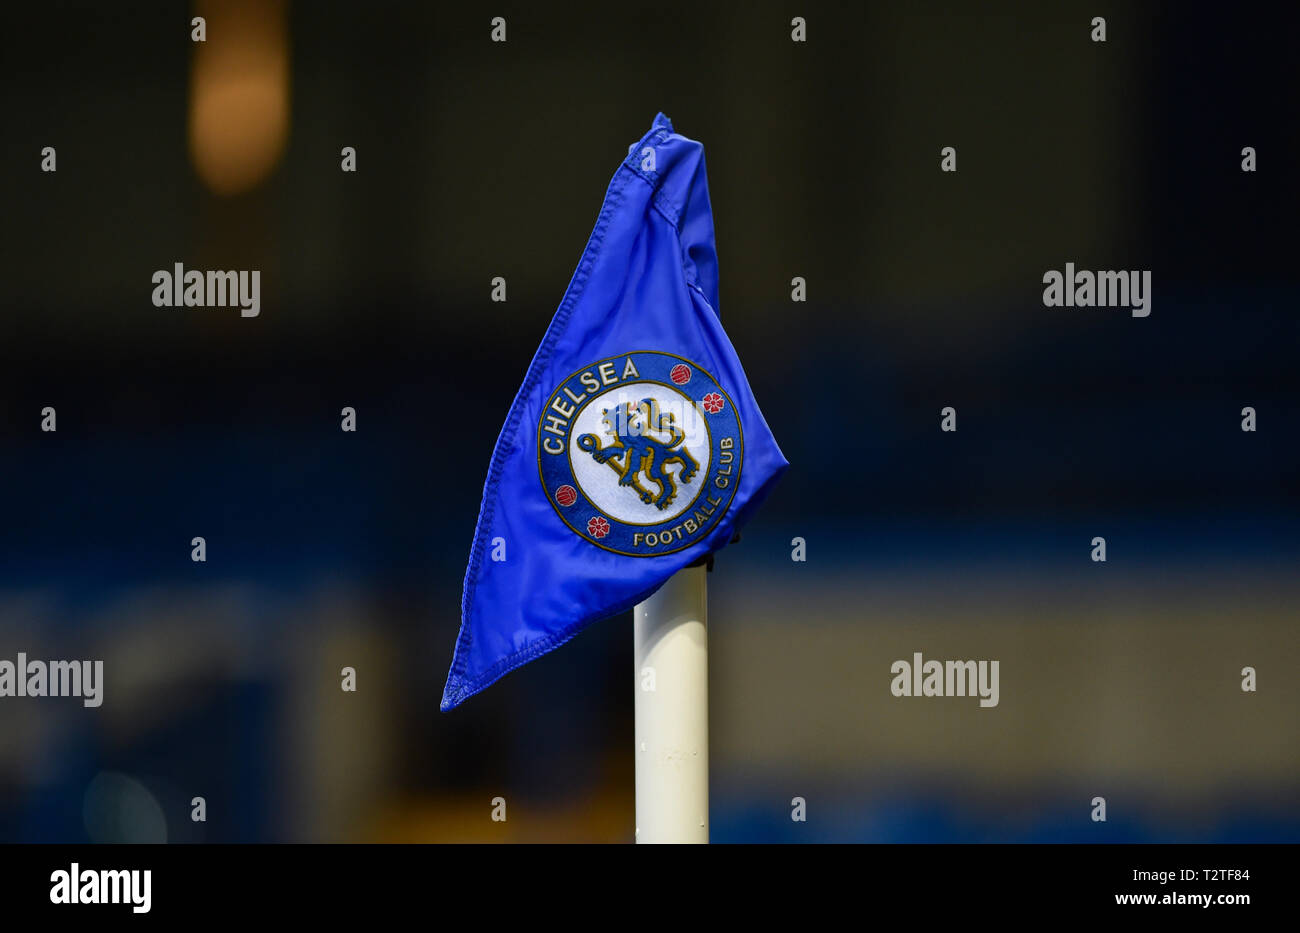 The Premier League Chelsea corner flag at Stamford Bridge . 3 April 2019 Editorial use only. No merchandising. For Football images FA and Premier League restrictions apply inc. no internet/mobile usage without FAPL license - for details contact Football Dataco Stock Photo